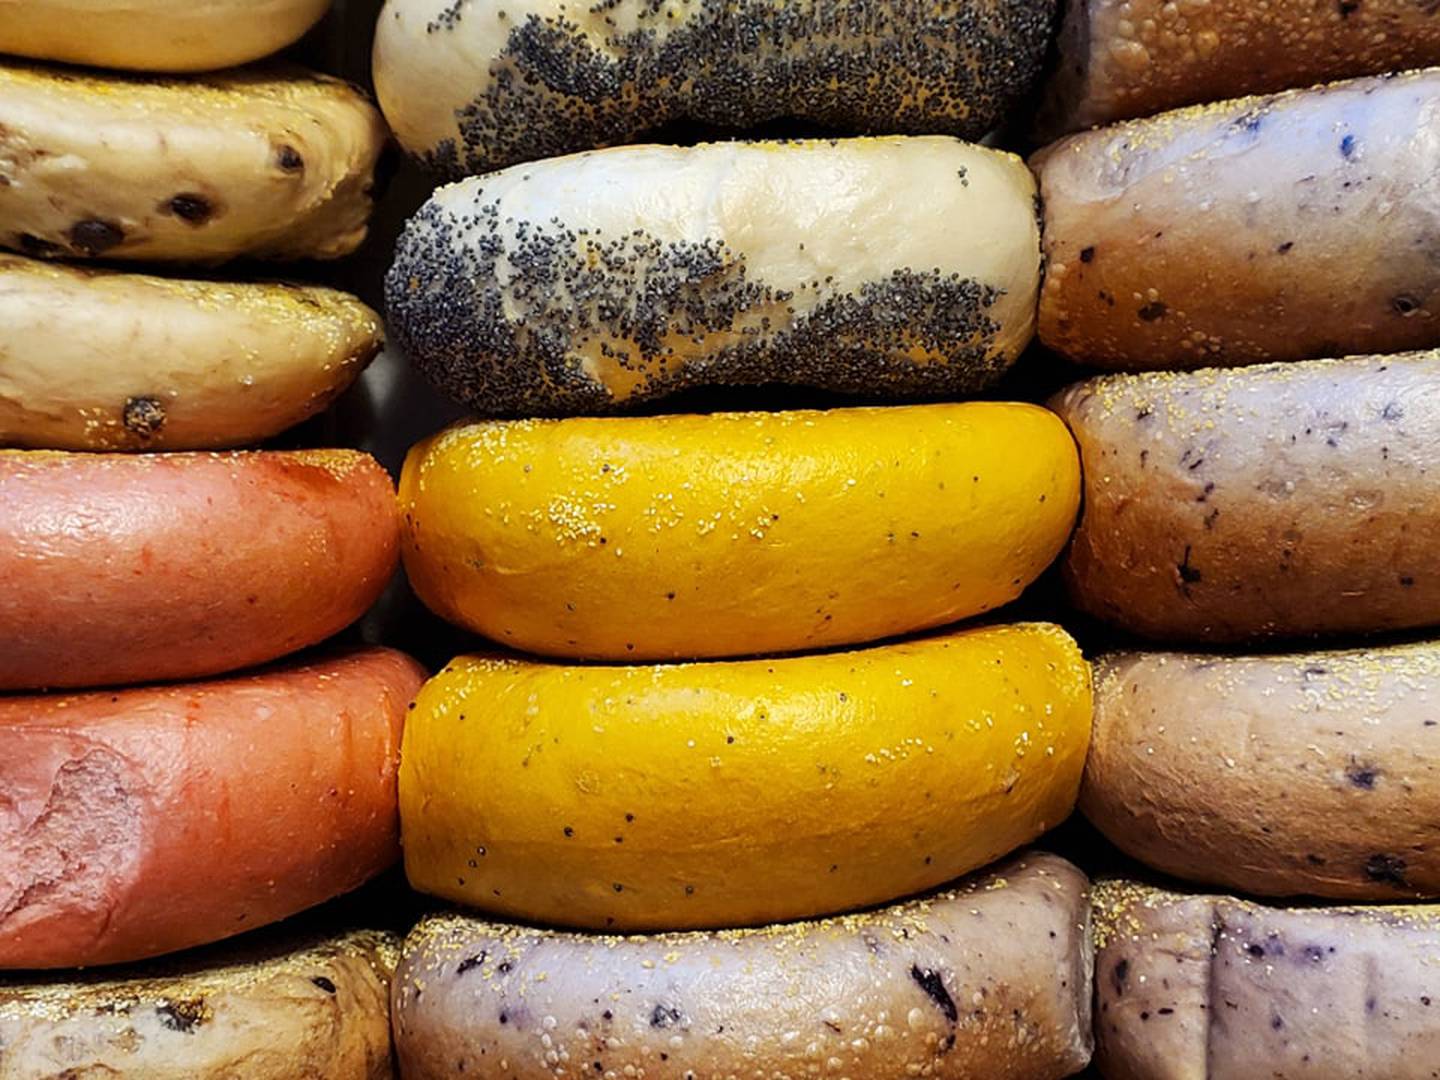 Pictured is an up-close view of a corporate party pack of 26 bagels from Great American Bagel in Joliet. The corporate party pack also comes with four flavors of cream cheese toppings.